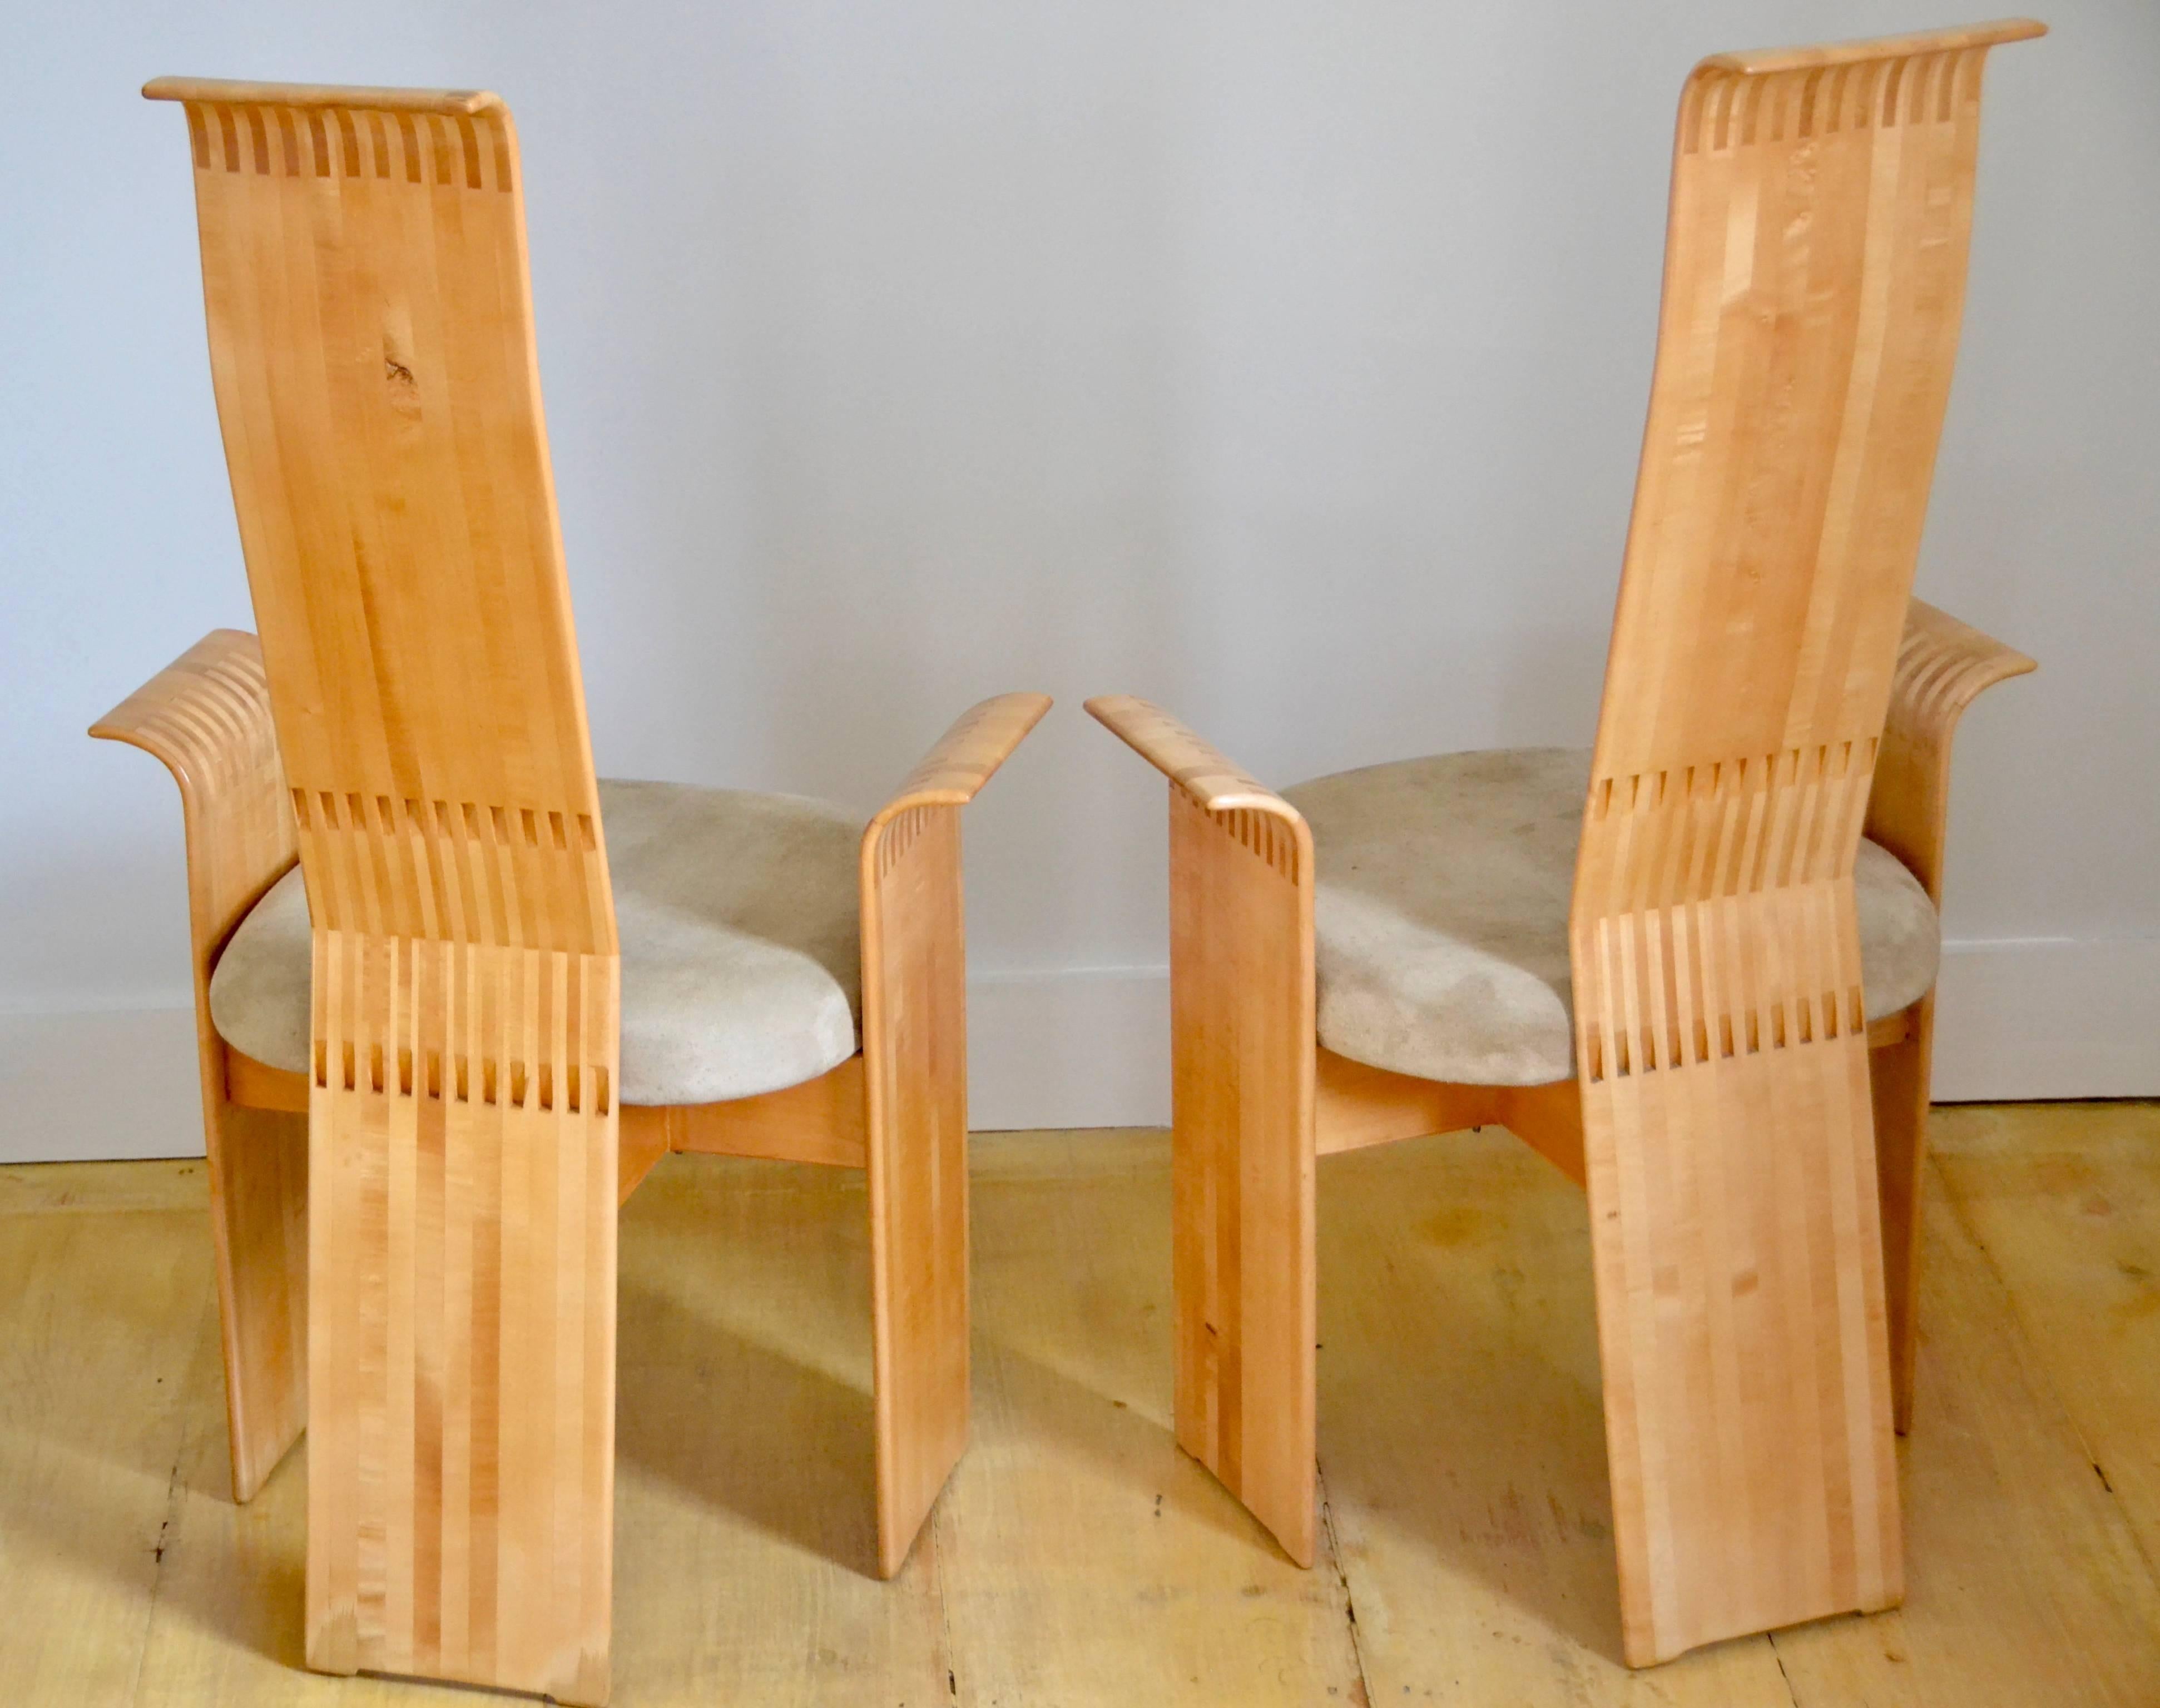 American Berthold Schwaiger Studio Crafted Laminated Chairs Signed and Dated 1985 